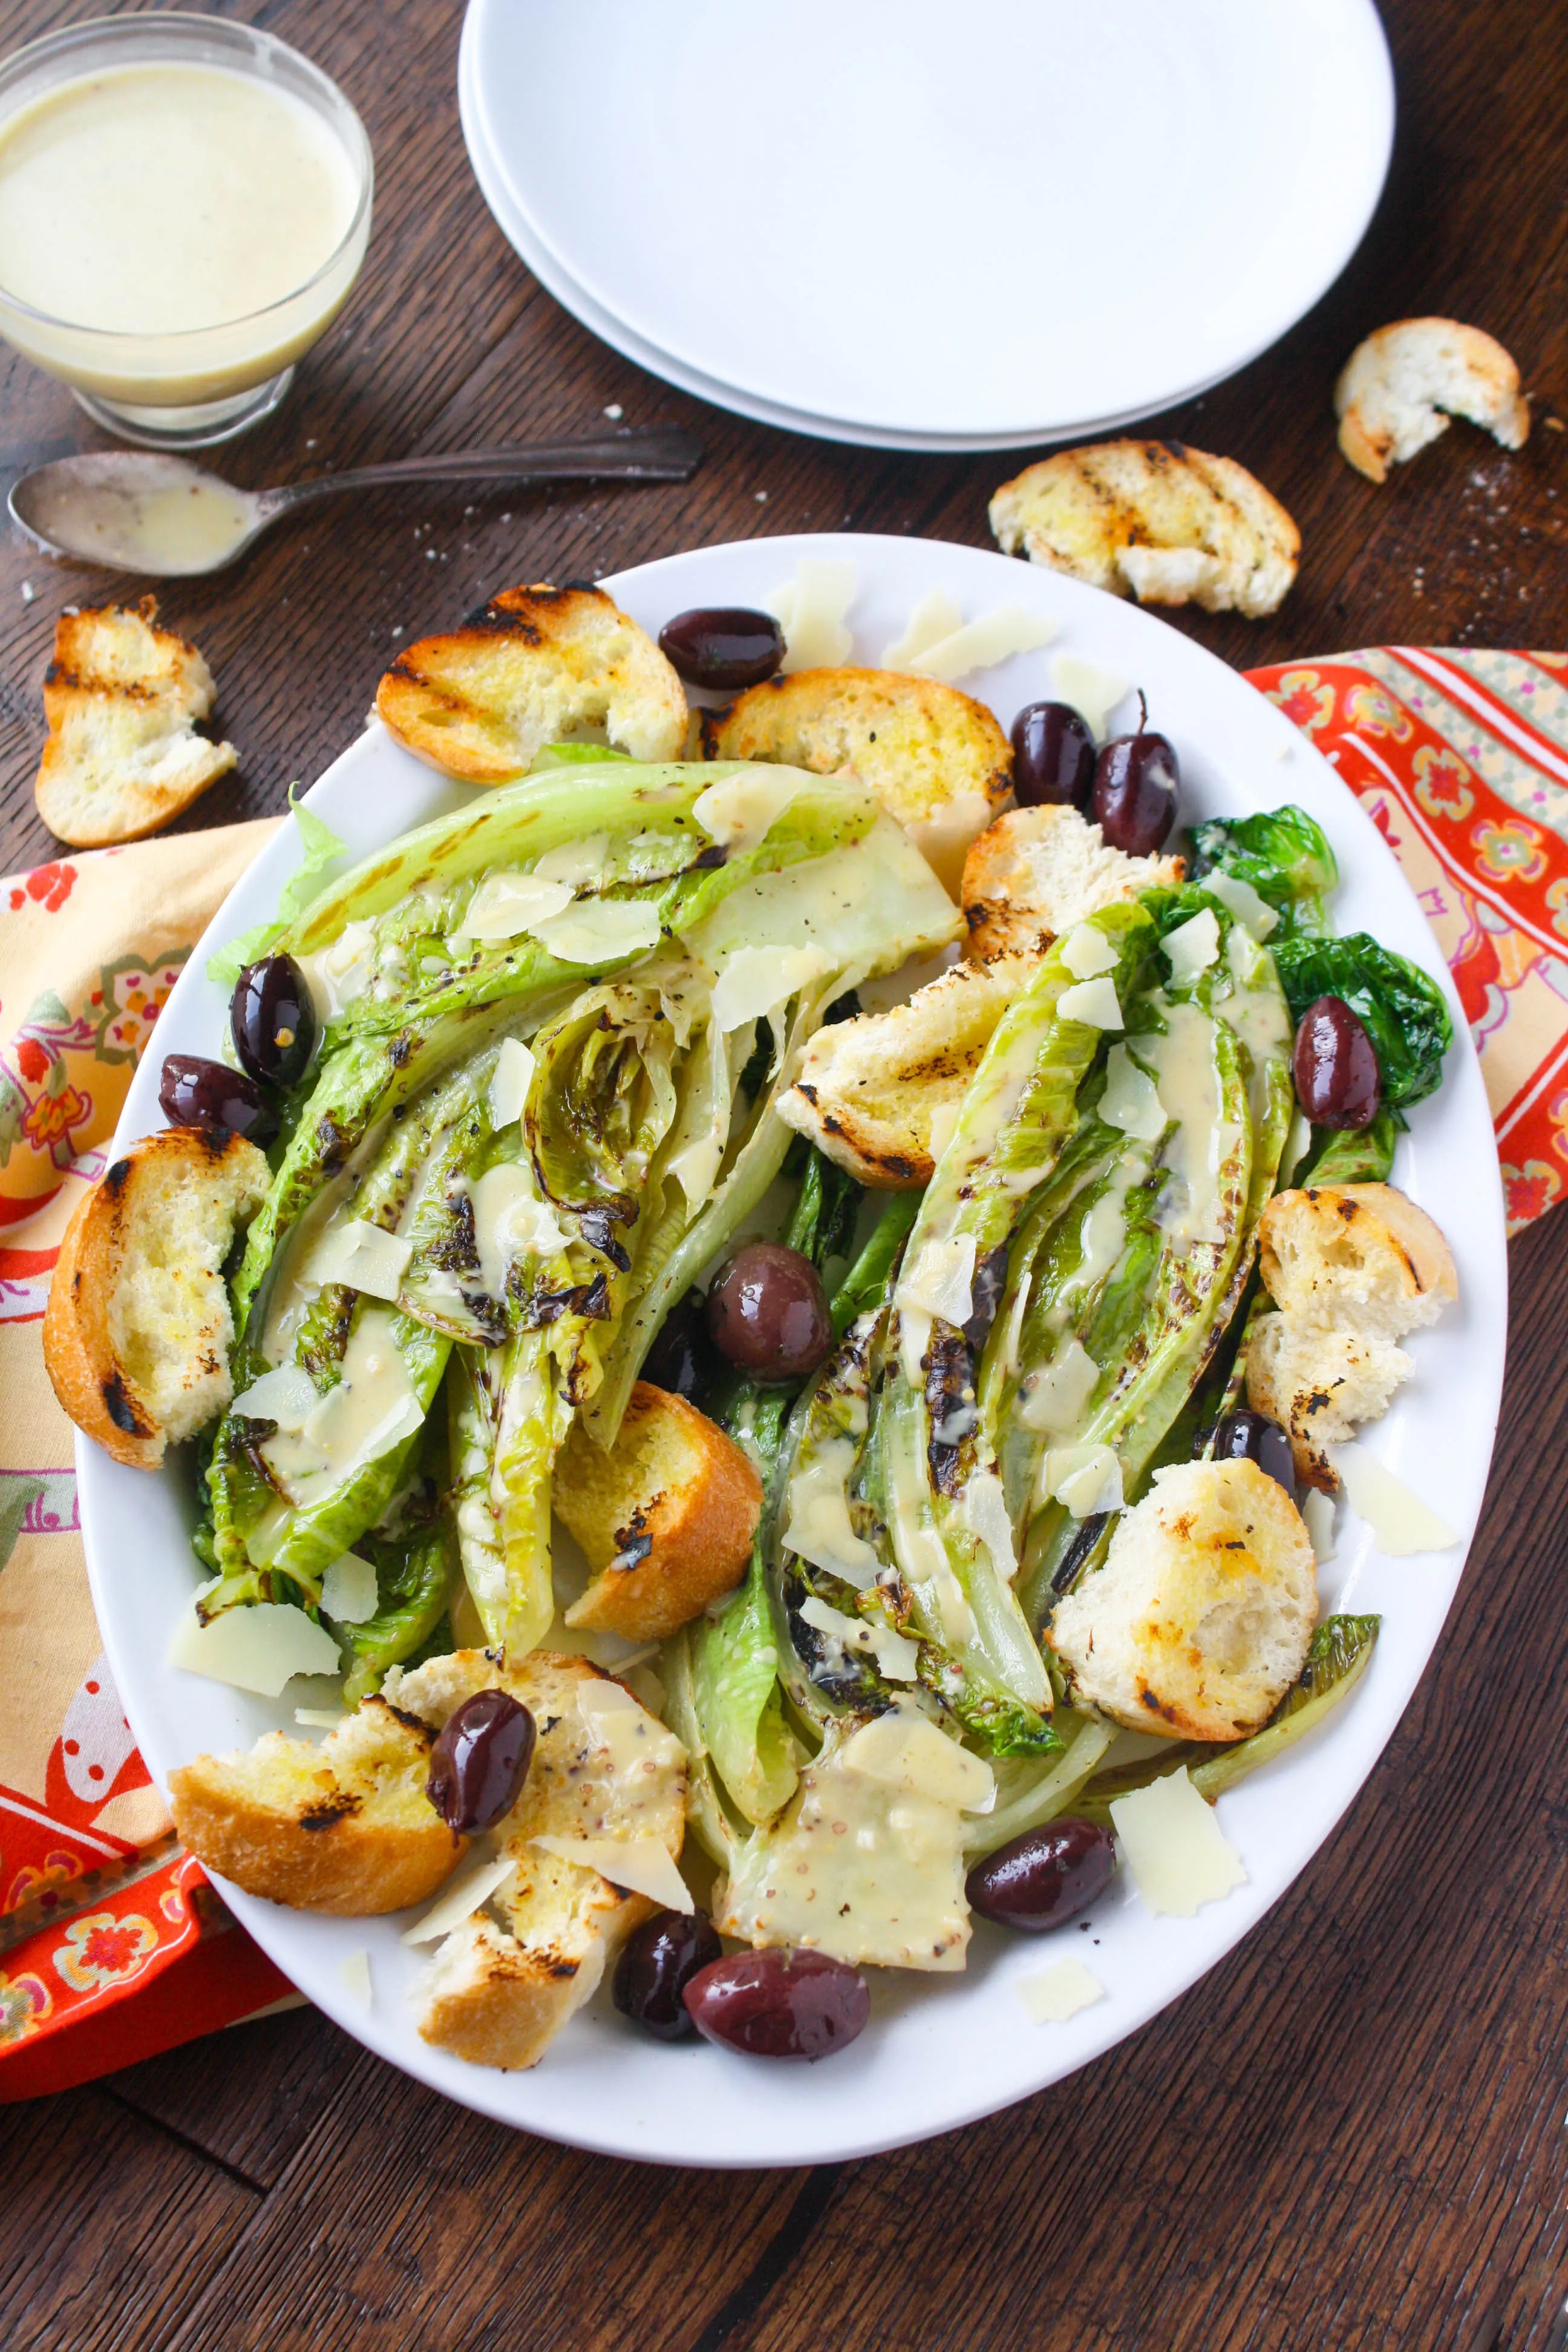 Grilled Romaine Salad with Caesar Dressing is a fun salad any time of year. You'll love the flavor grilling adds, and the dressing is delicious (with no egg included)!